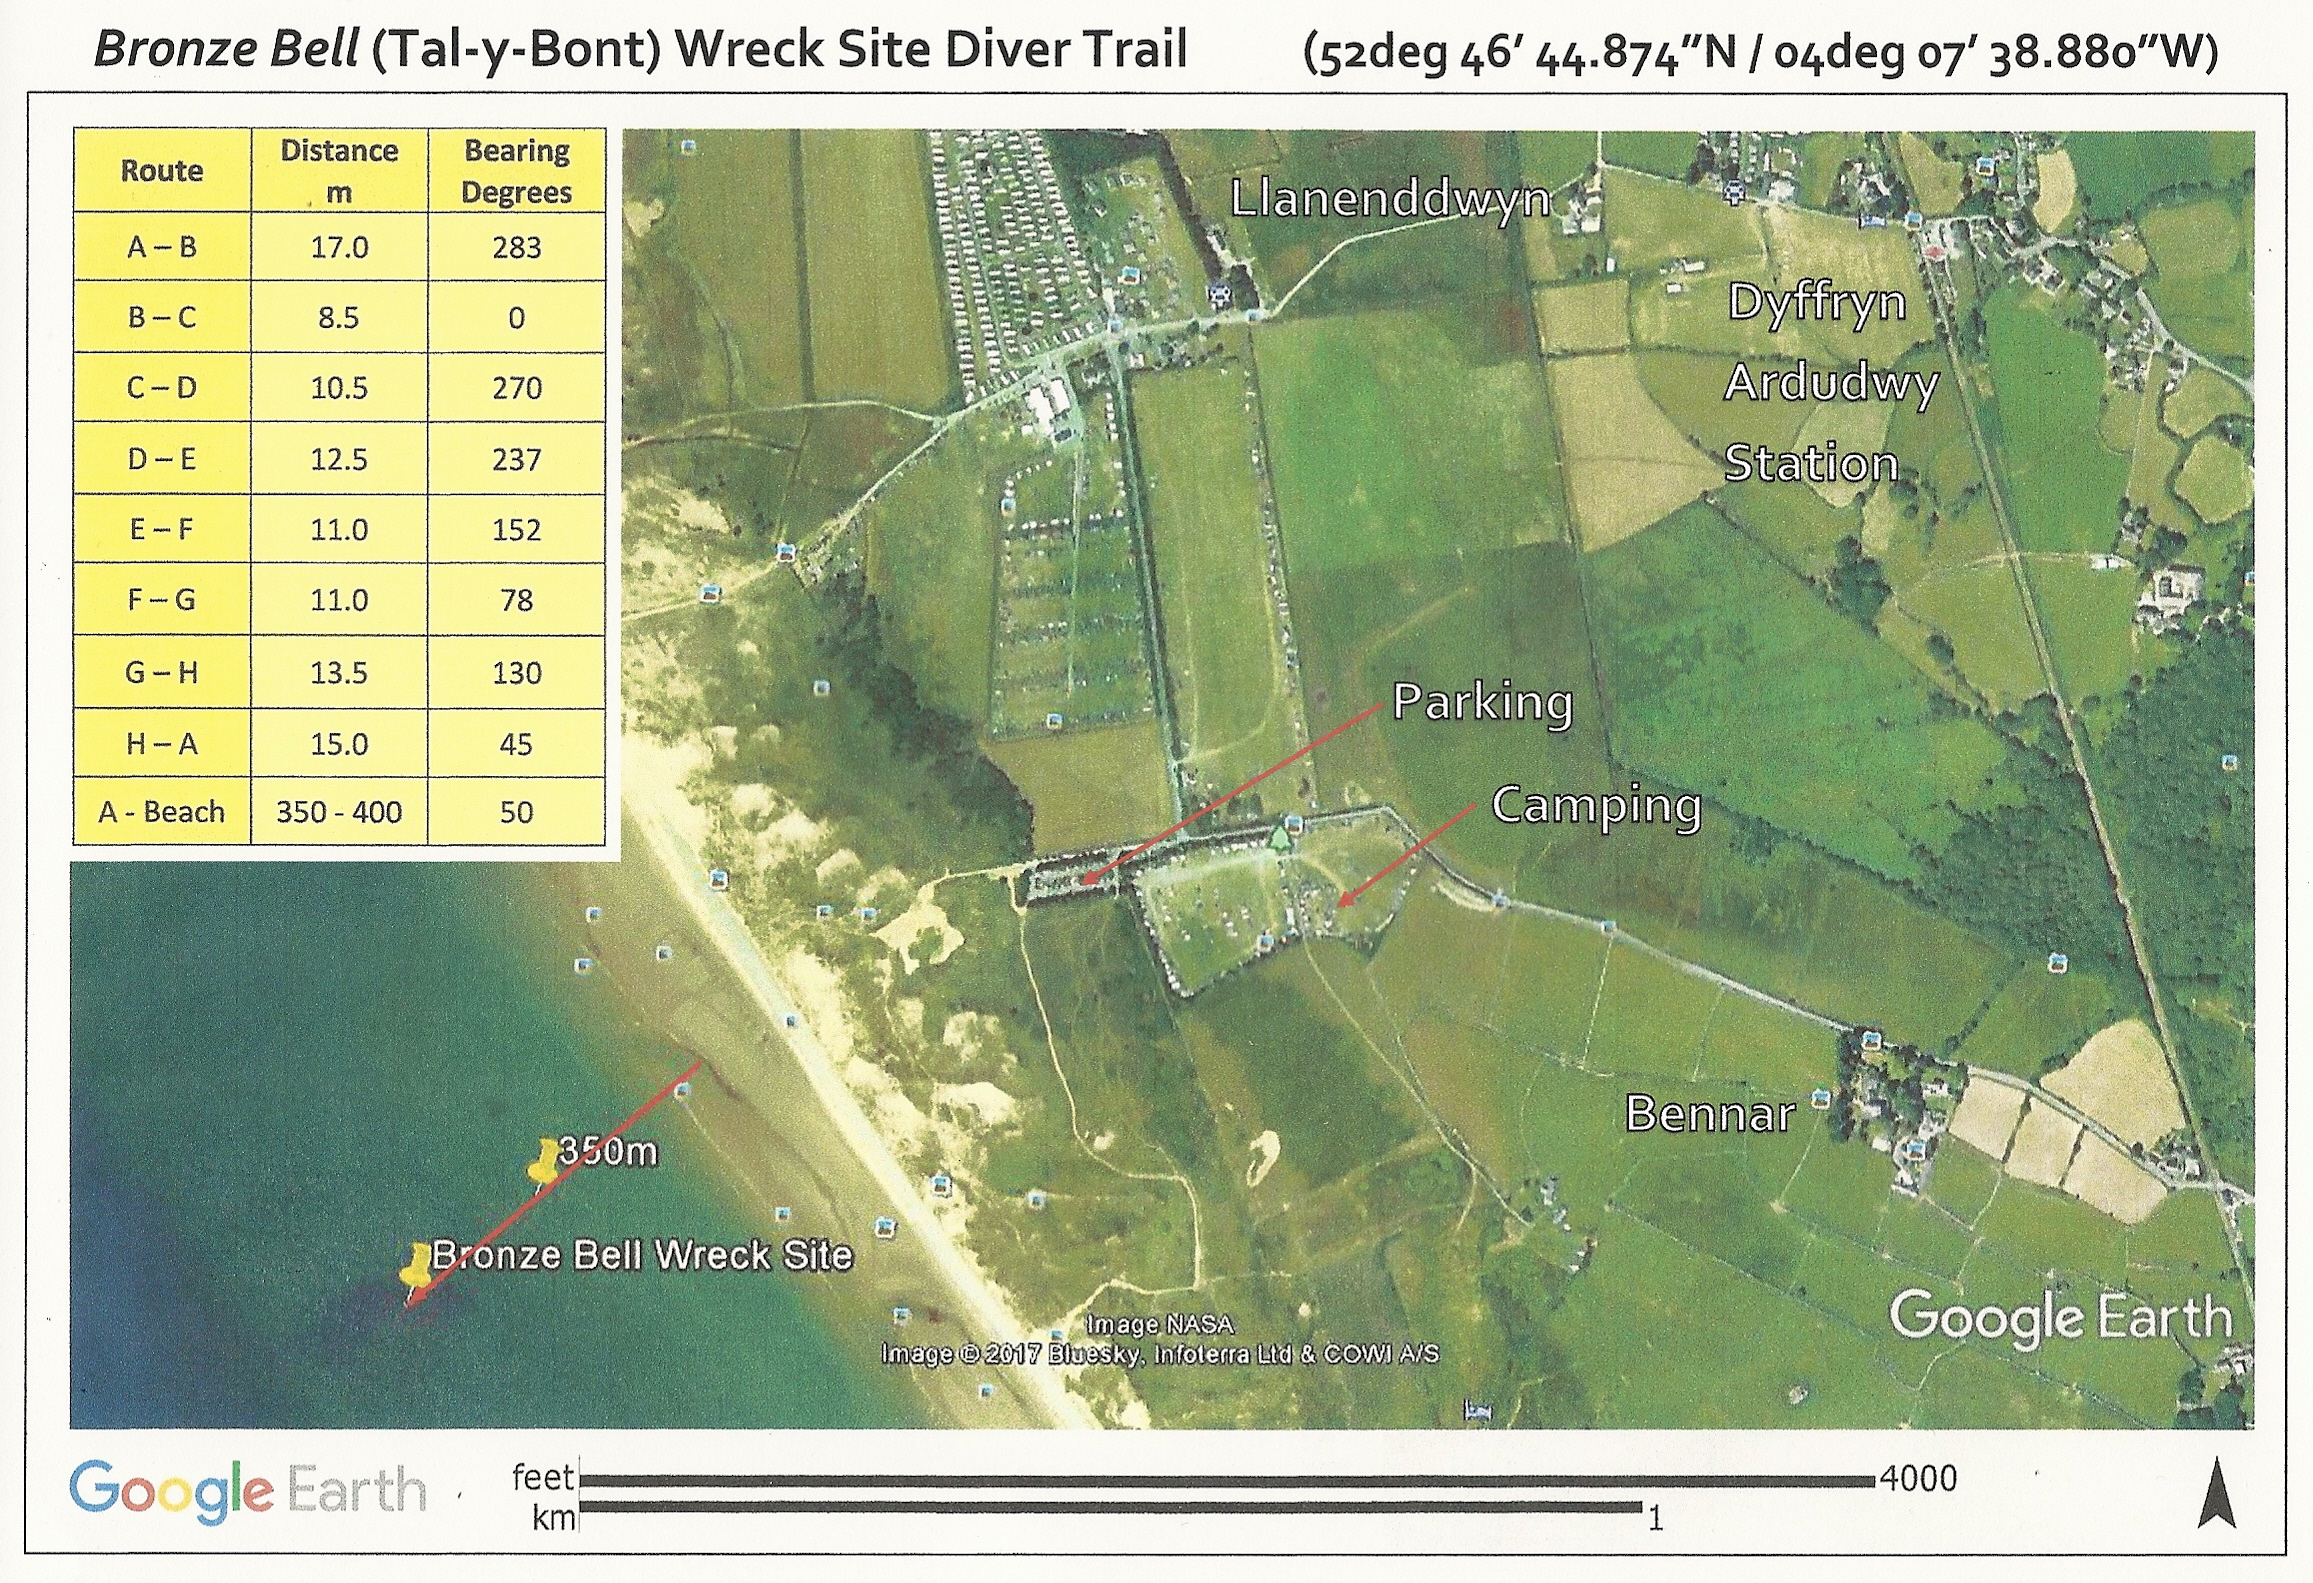 Proposed Diver Trail